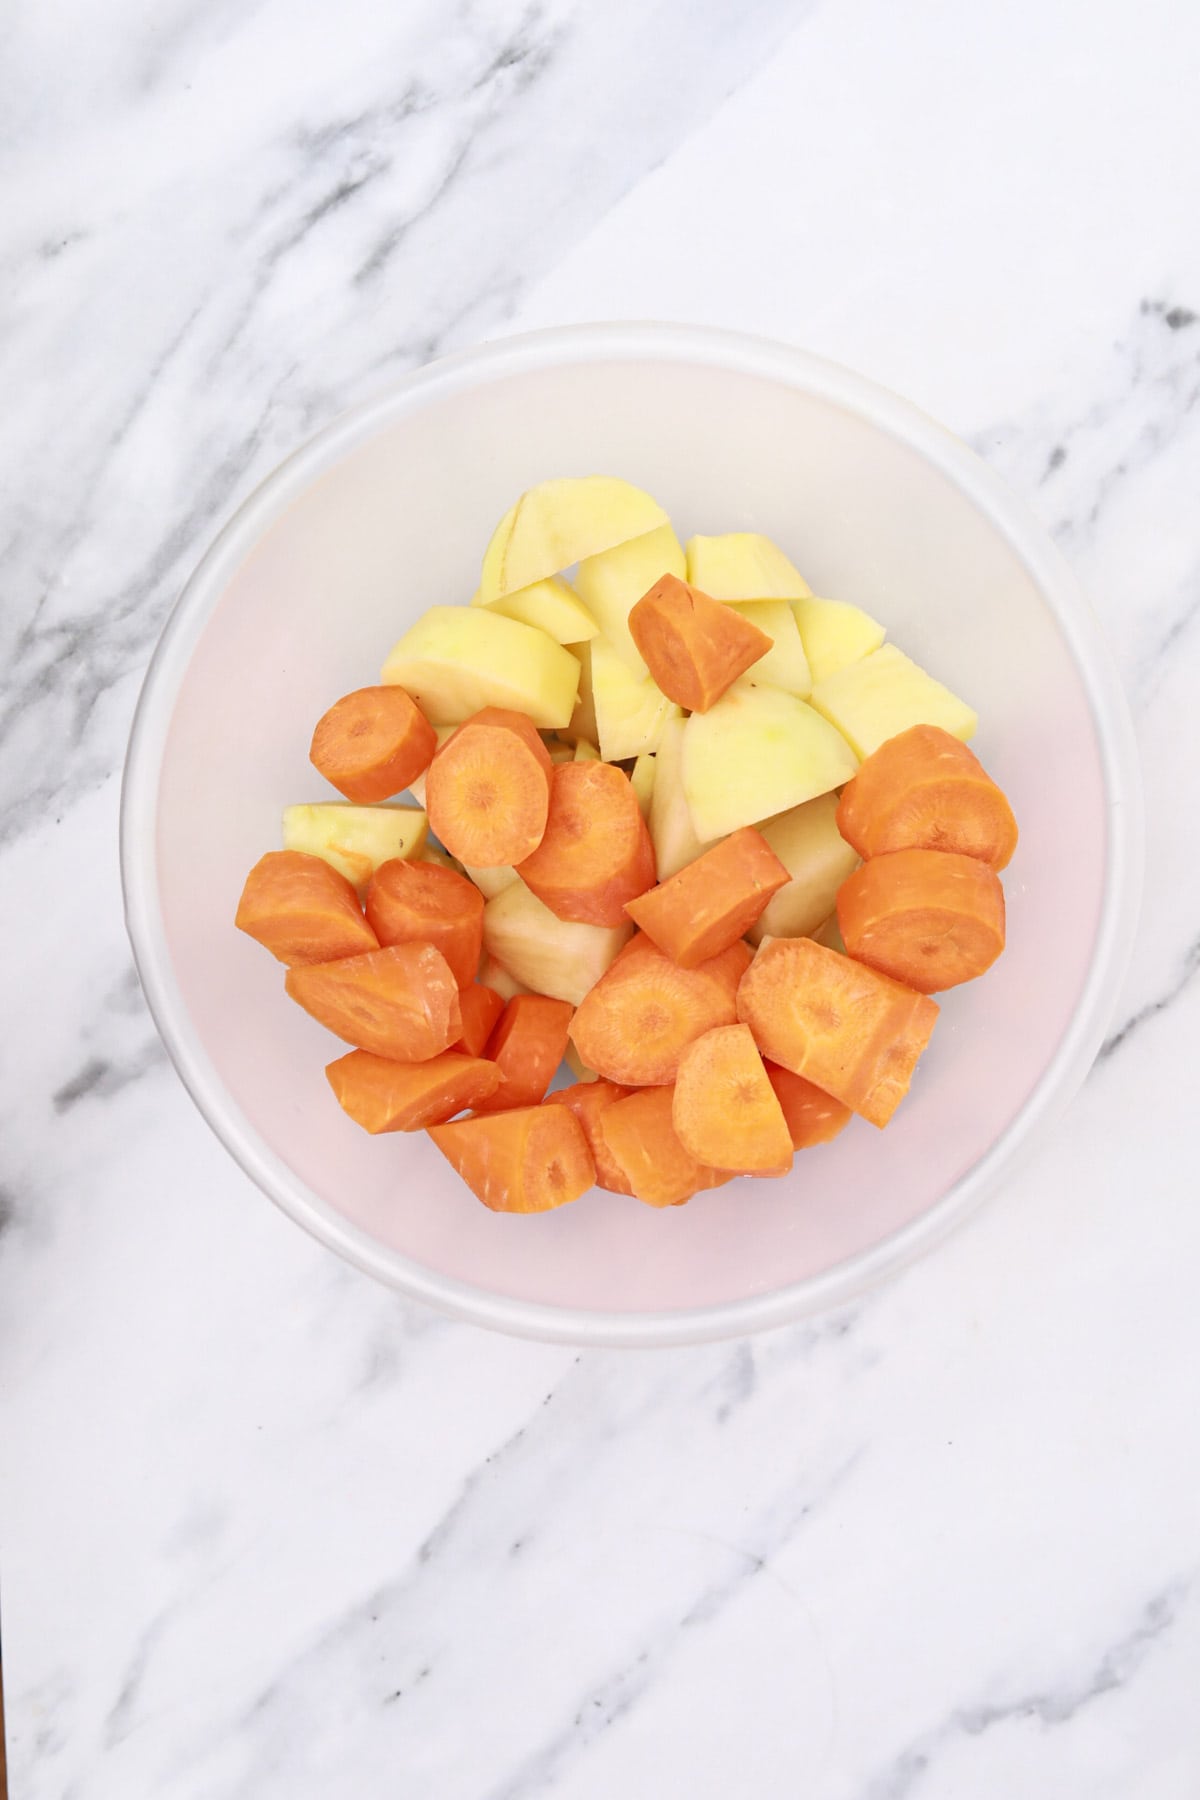 diced carrots and potatoes in air fryer.